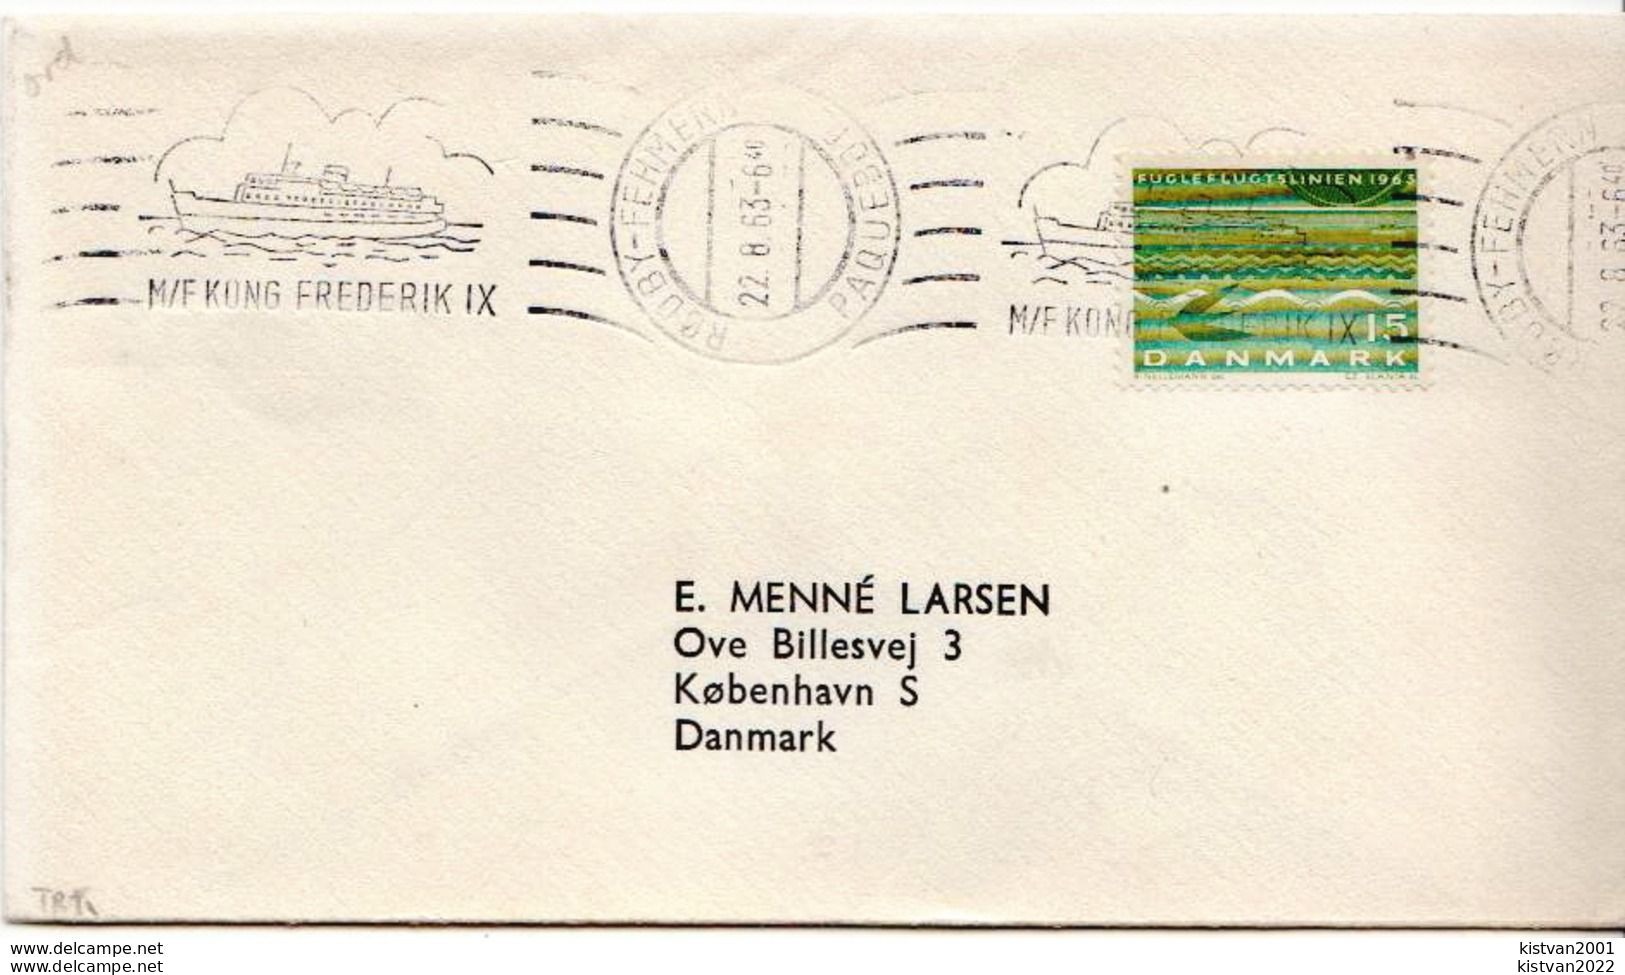 Postal History Cover: Denmark Cover With M/F KONG FREDERIK IX Ship Cancel - Lettres & Documents